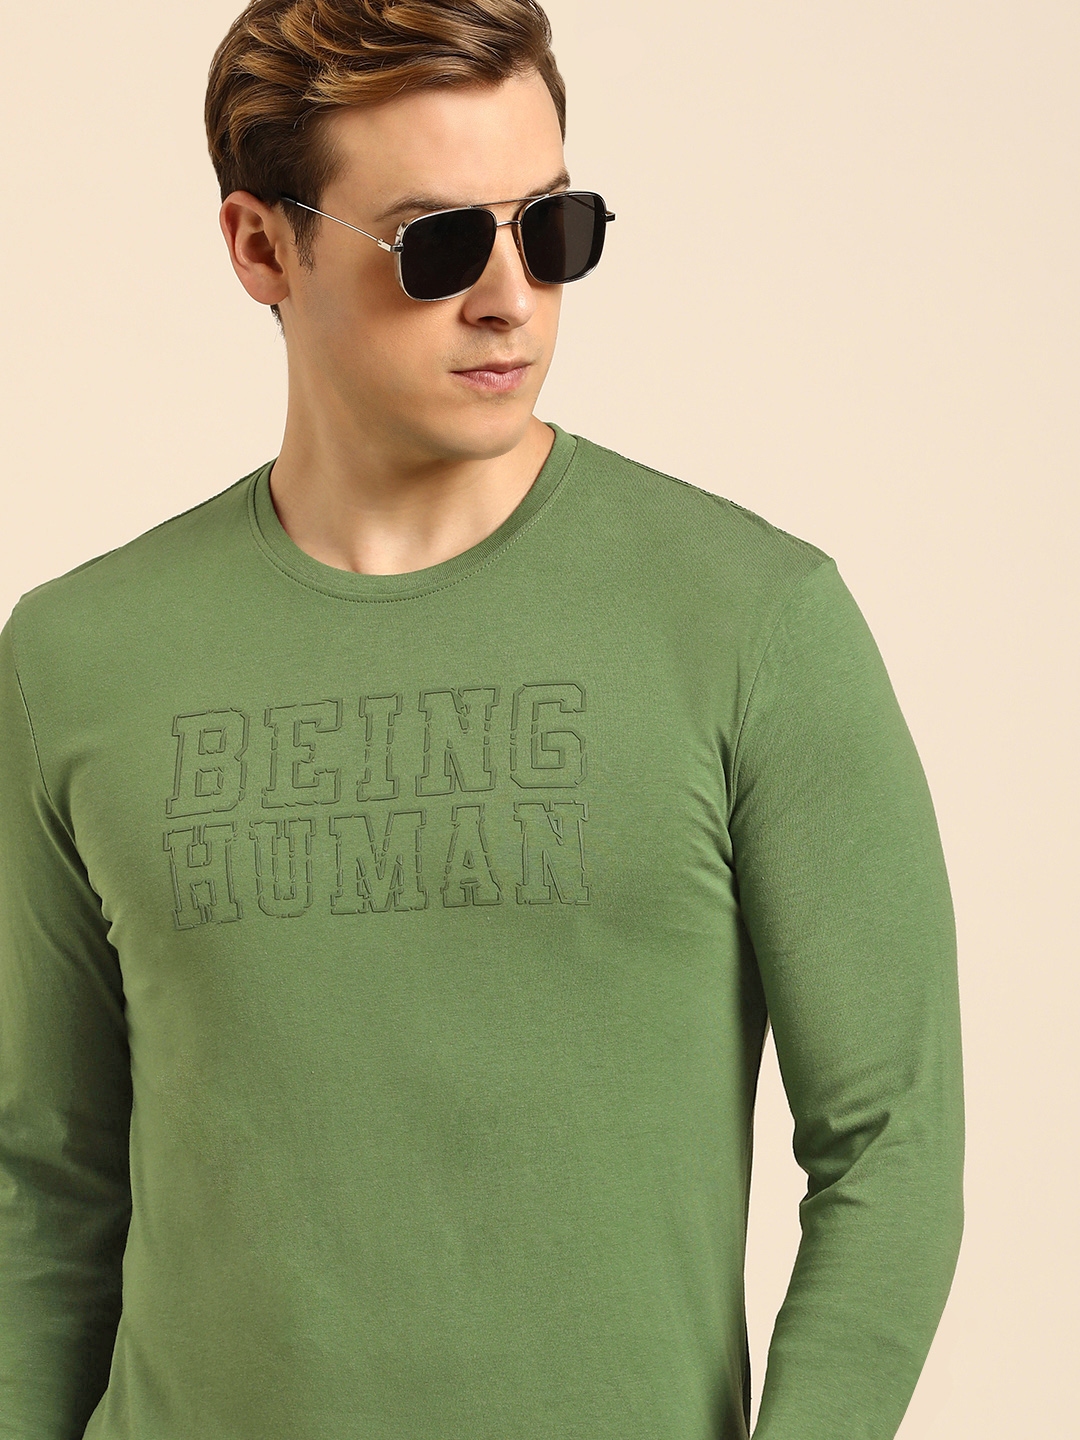 Buy Being Human Brand Logo Pure Cotton Applique T Shirt - Tshirts for ...